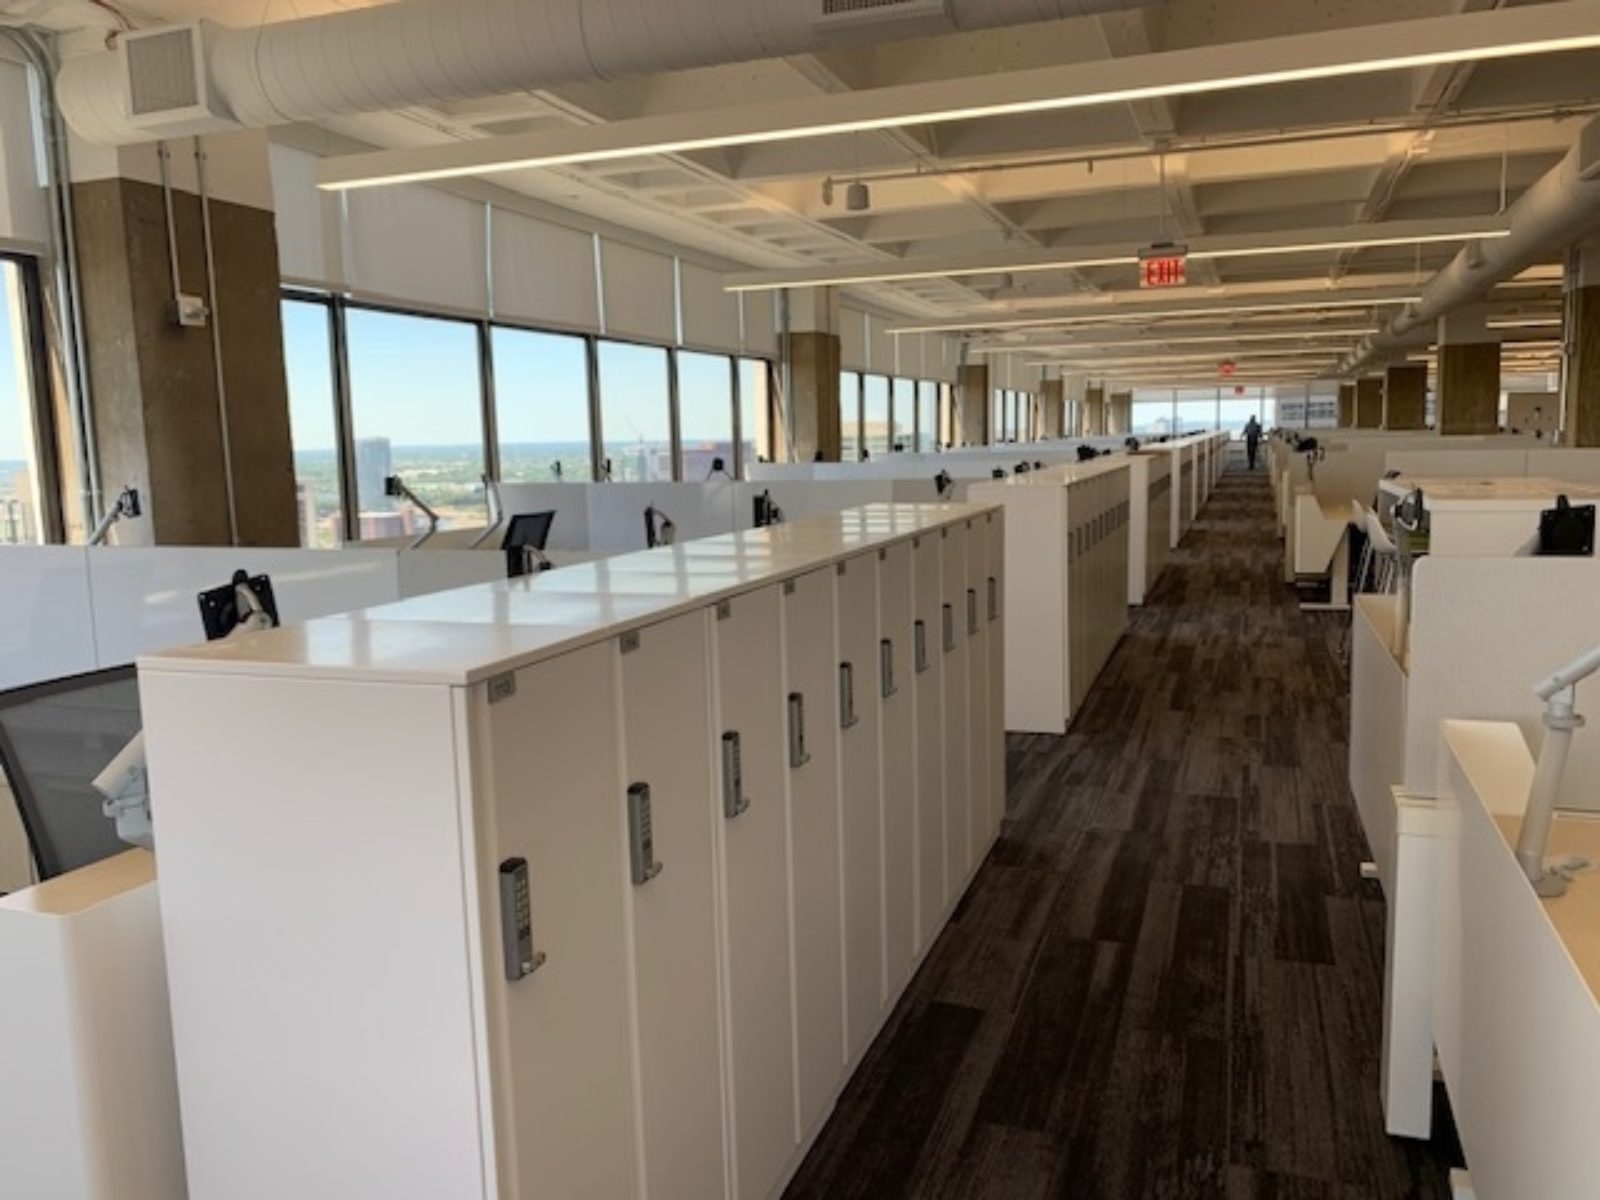 Open area with rows of lockers on the ends of workstation clusters. Neutral and clean color palette throughout the space.